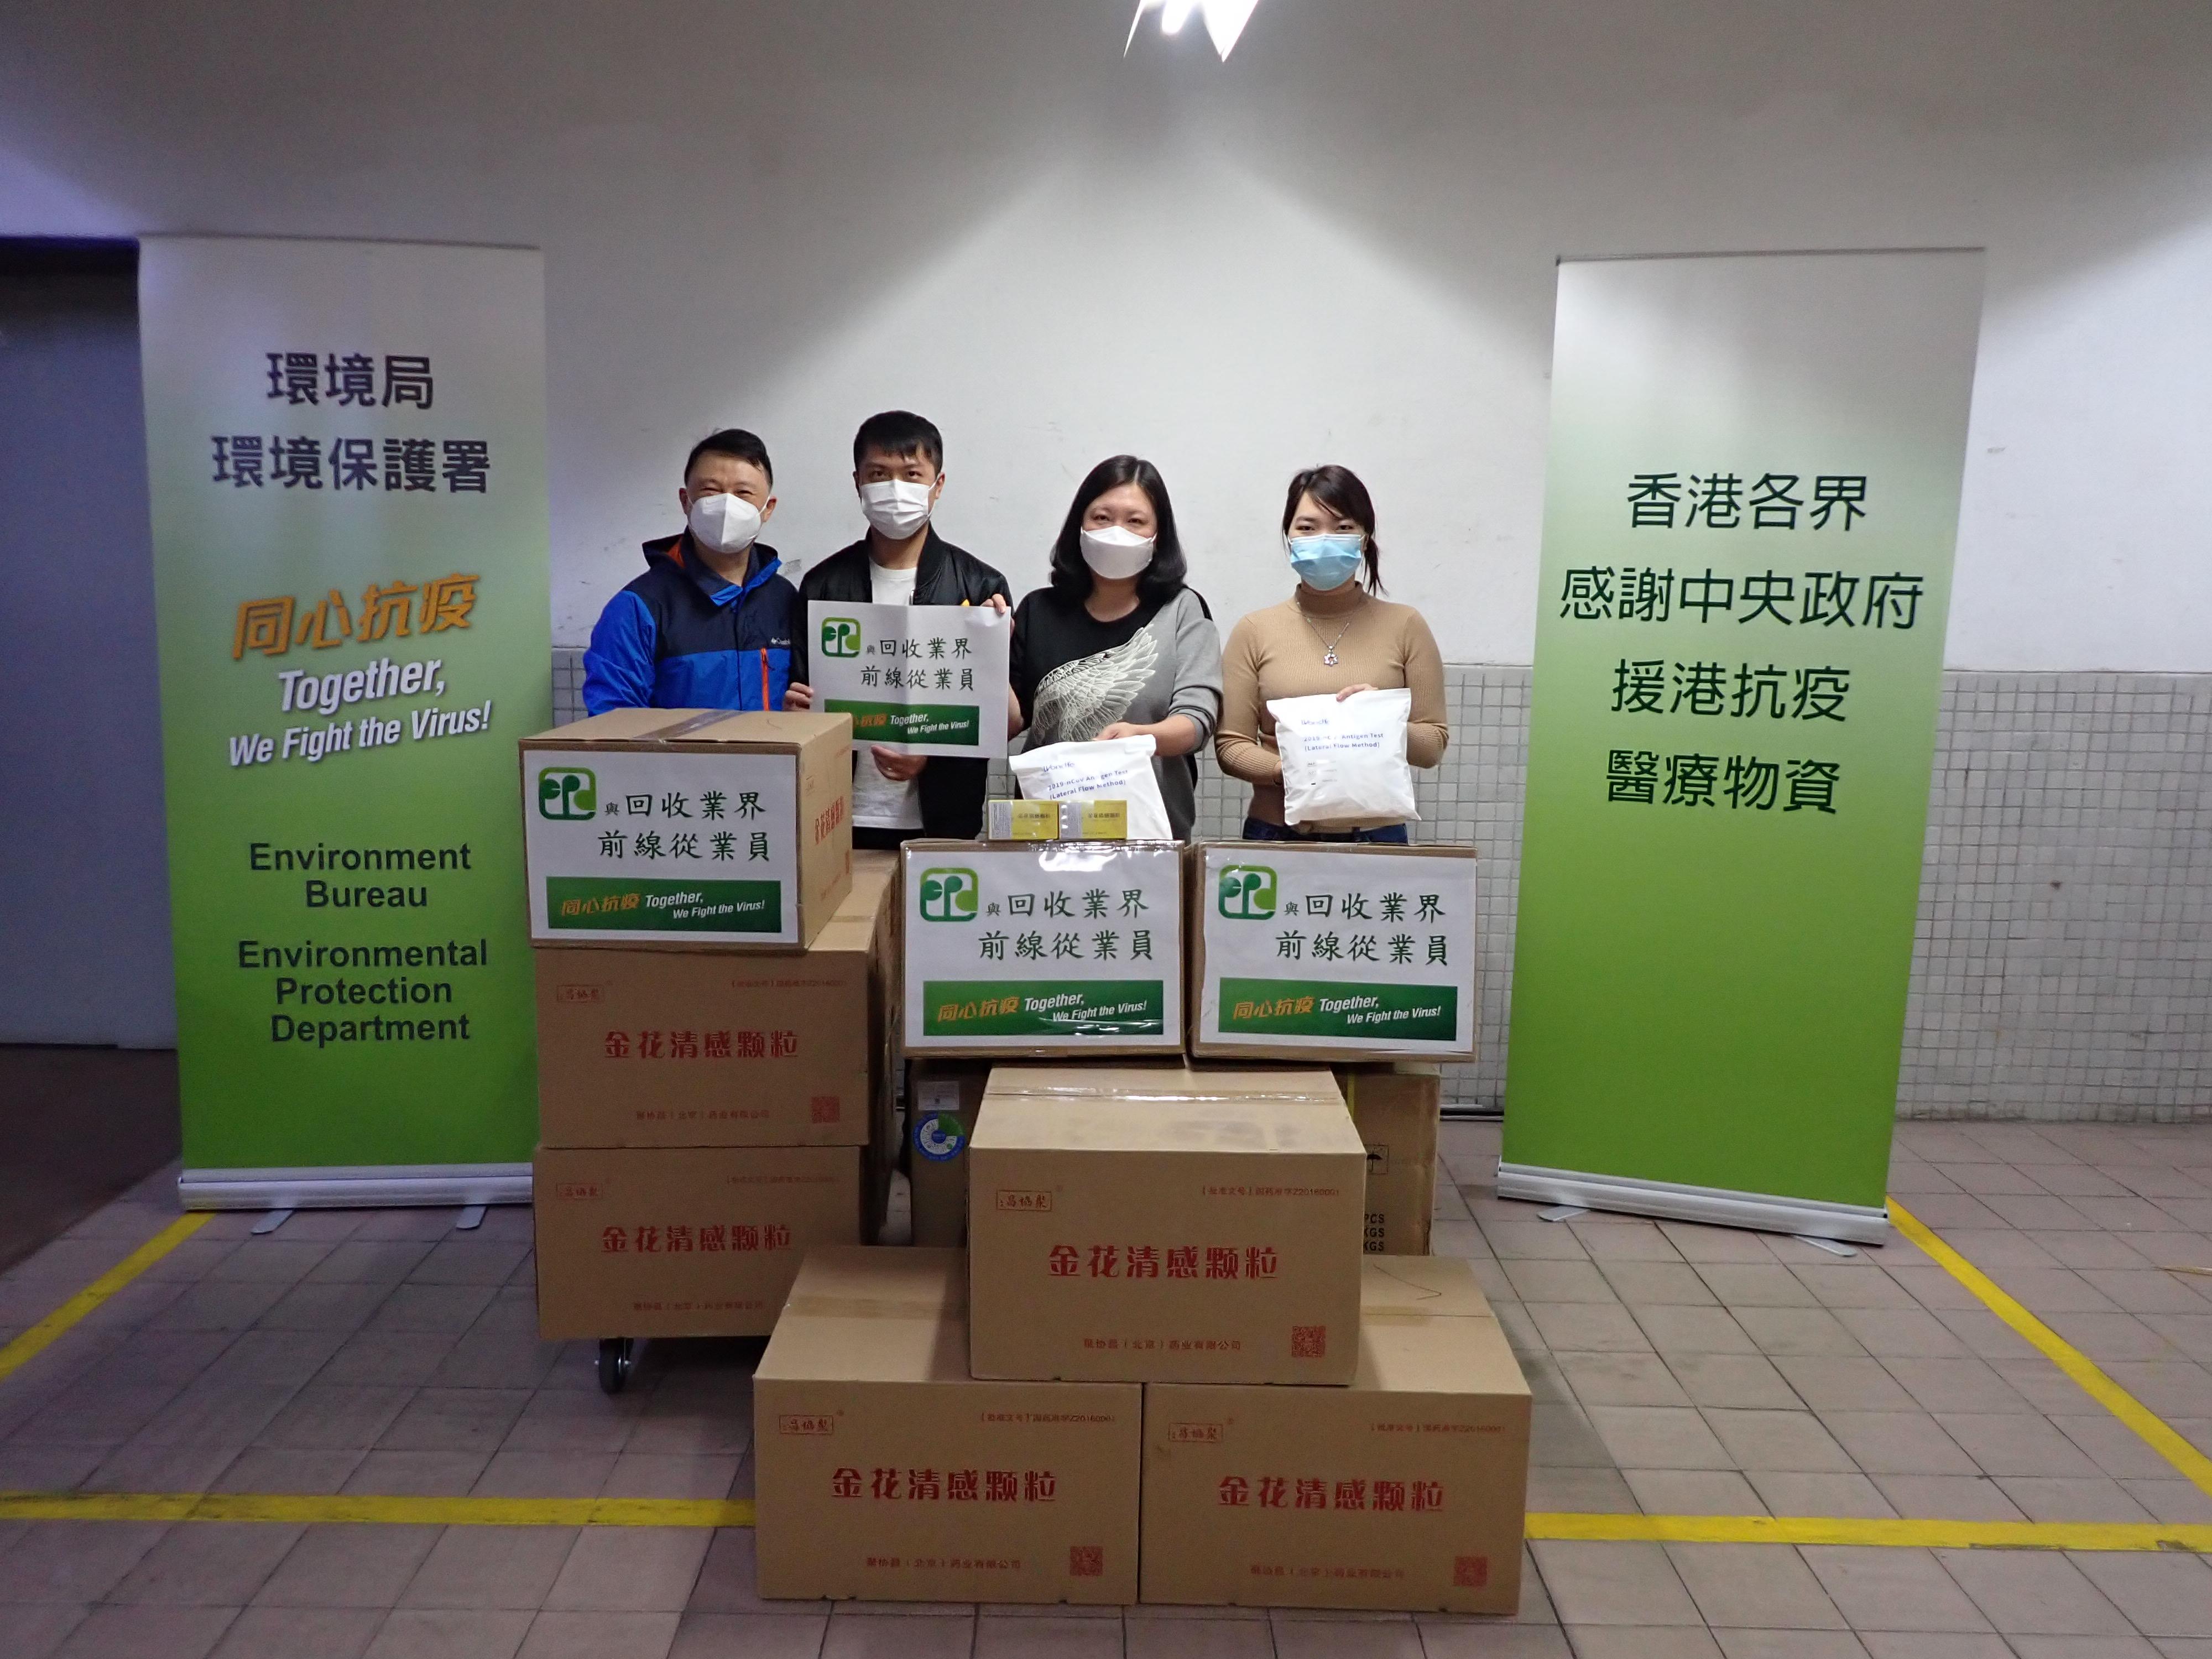 The Environmental Protection Department (EPD) has distributed a total of about 24 000 rapid antigen test (RAT) kits and 24 000 boxes of anti-epidemic proprietary Chinese medicines donated by the Central Government to various recycling trade associations and recycling service contractors, so as to provide anti-epidemic support to the frontline staff. Picture shows EPD staff distributing RAT kits and anti-epidemic proprietary Chinese medicines to a representative of the Federation of Environmental and Hygienic Services.